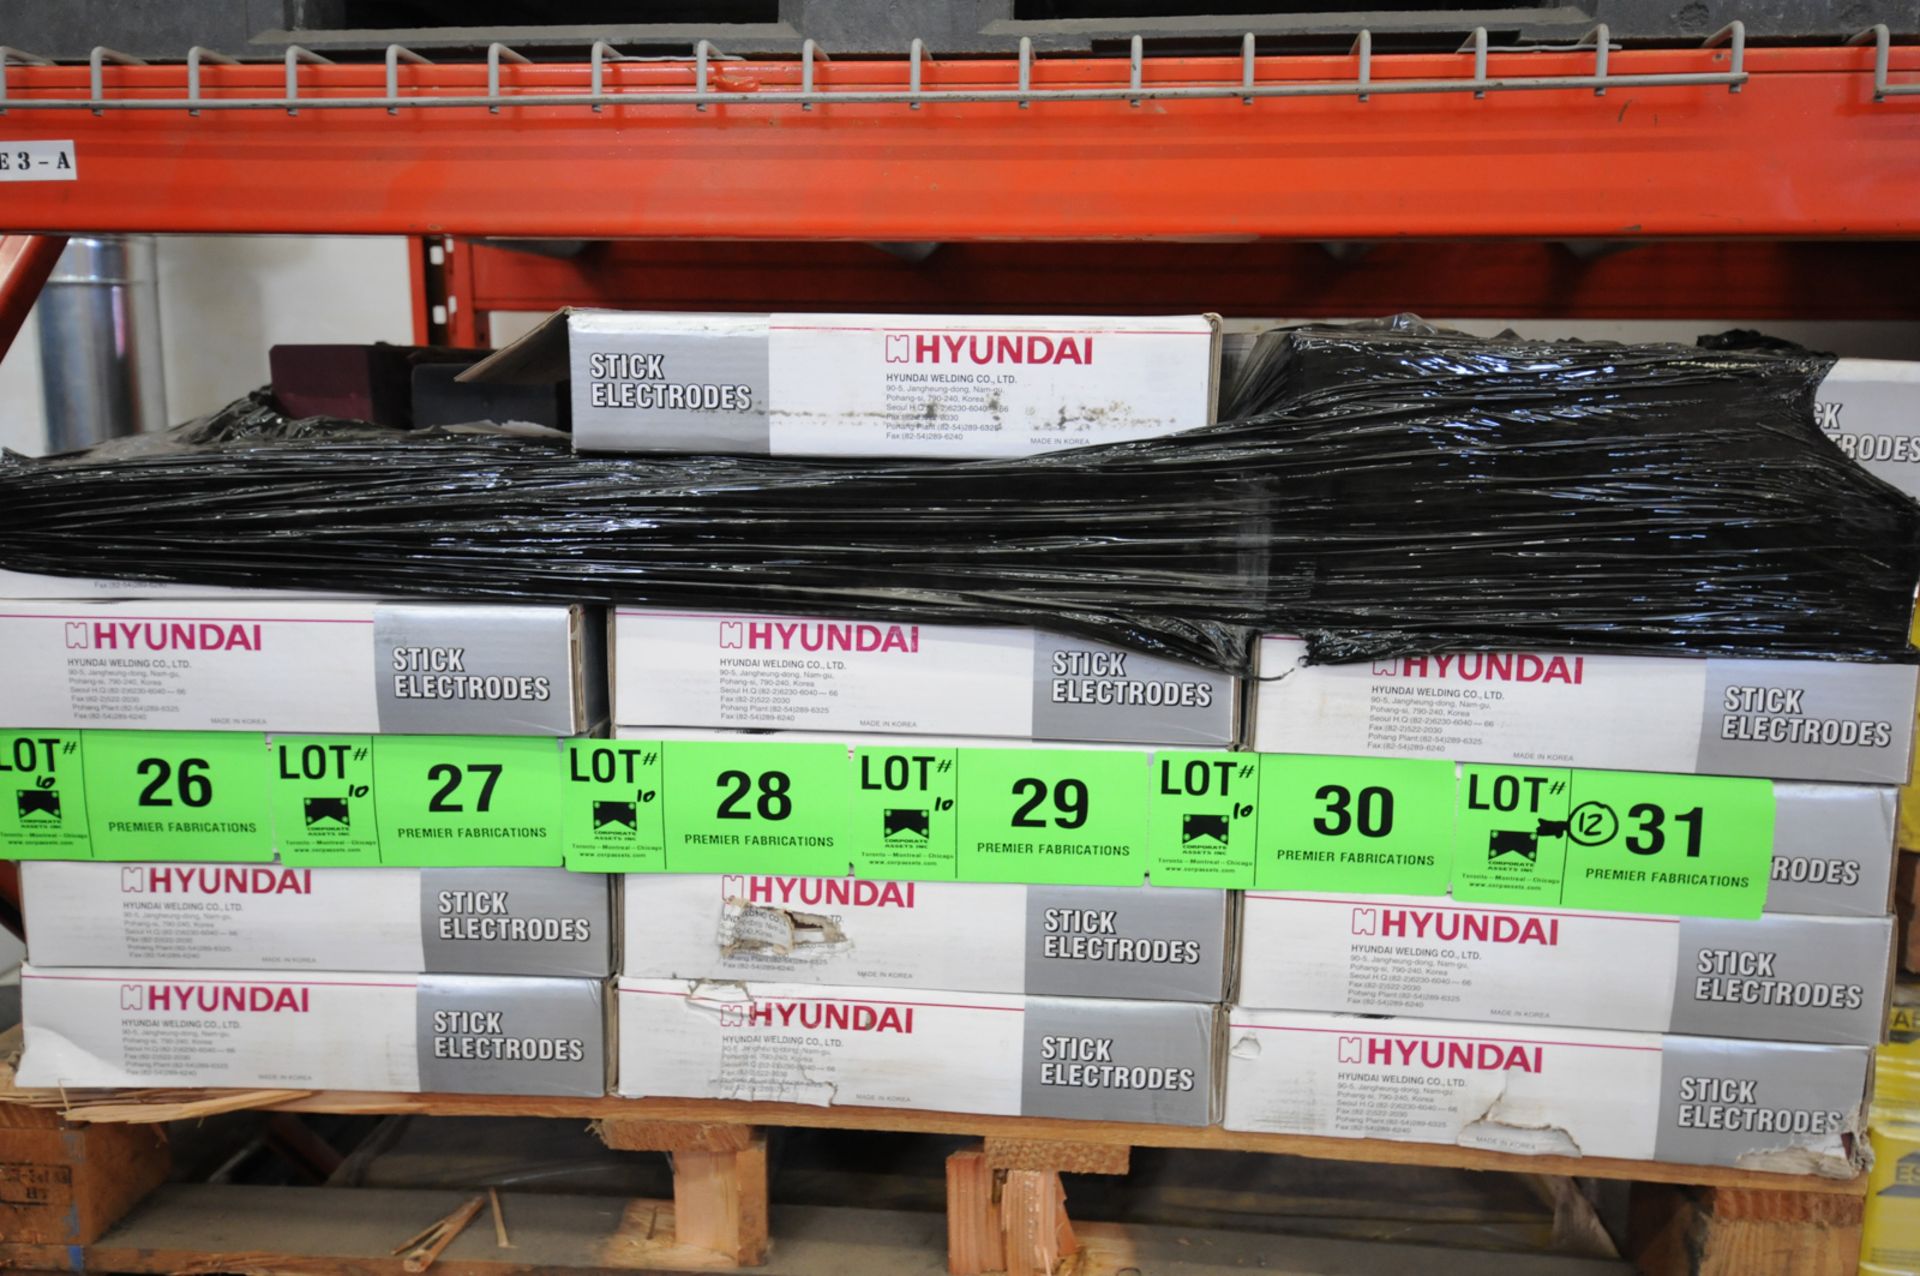 LOT/ (10) 44LB BOXES OF HYUNDAI S-309L.16 1/8"X14" STICK WELDING ELECTRODES CWB CERTIFIED TO CSA W48 - Image 4 of 4